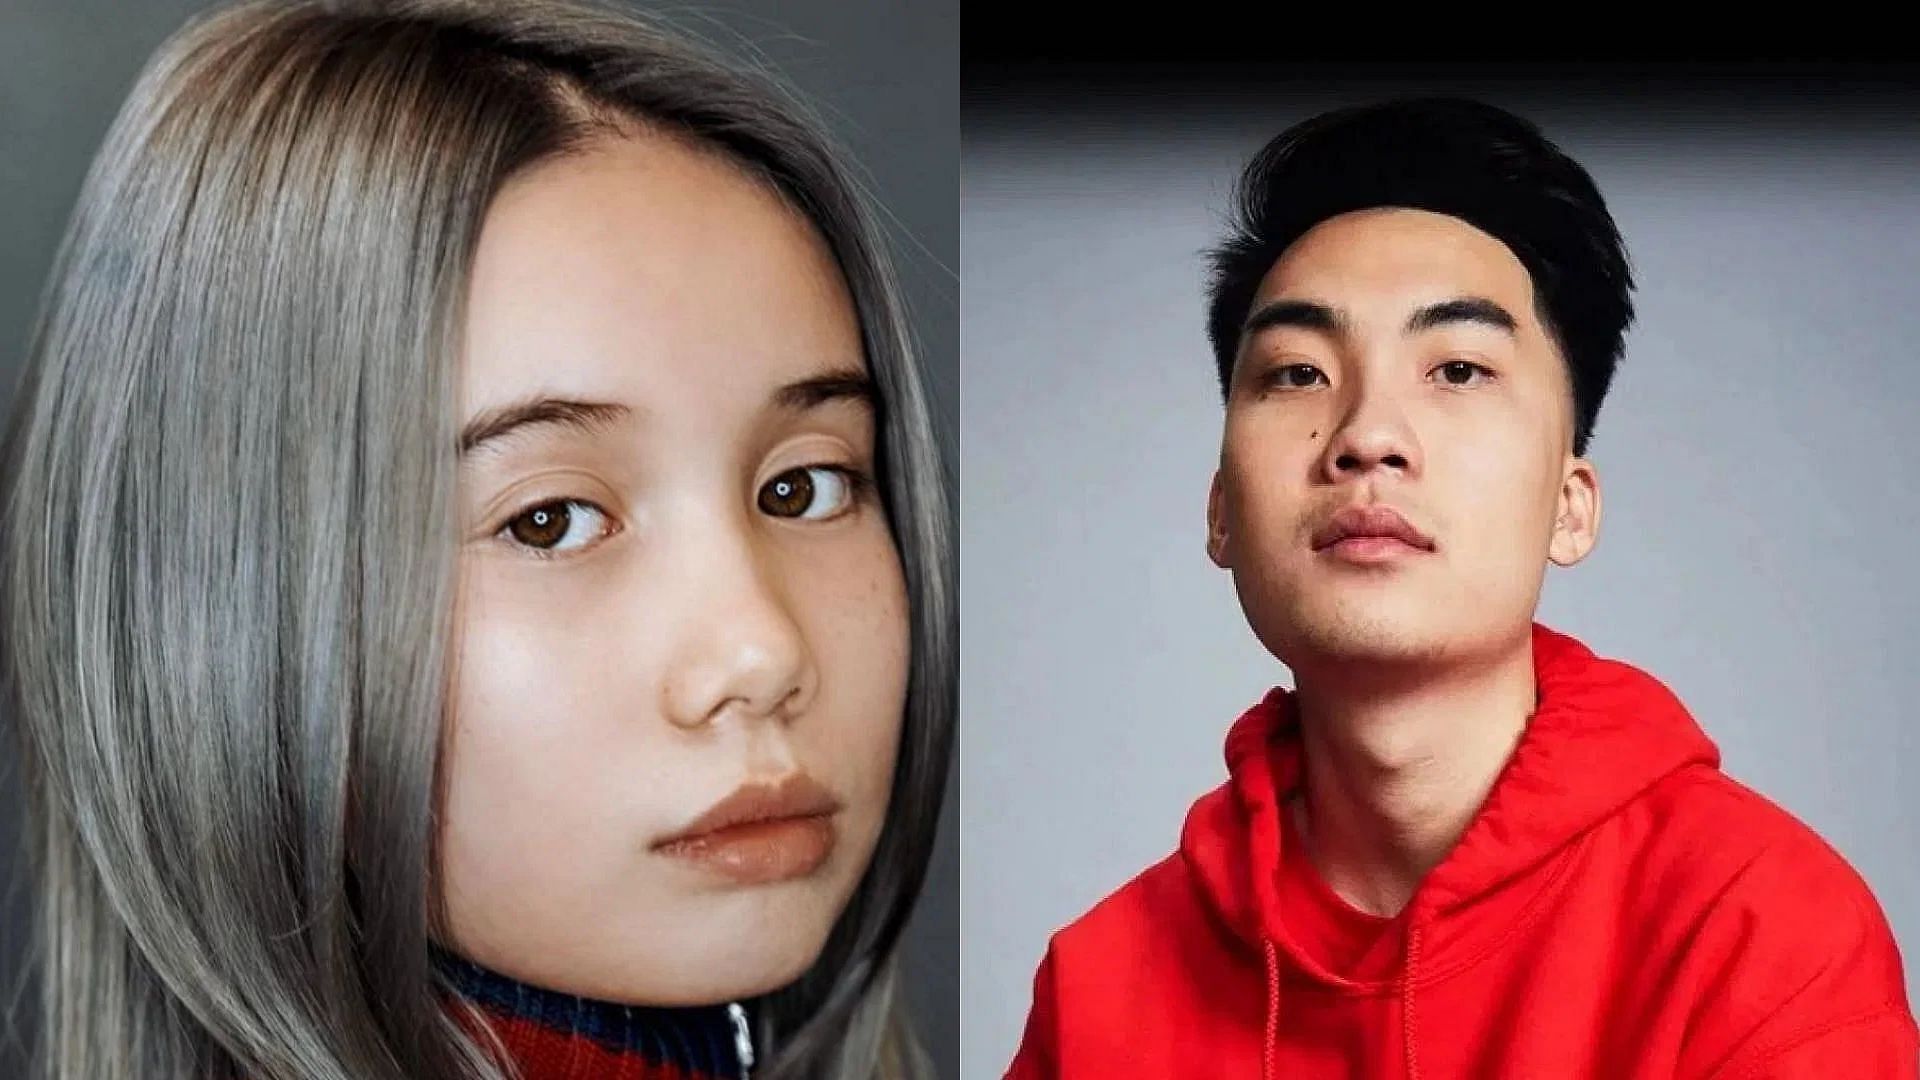 Lil Tay wanted to connect with RiceGum a month before her tragic death (Image via Sportskeeda)